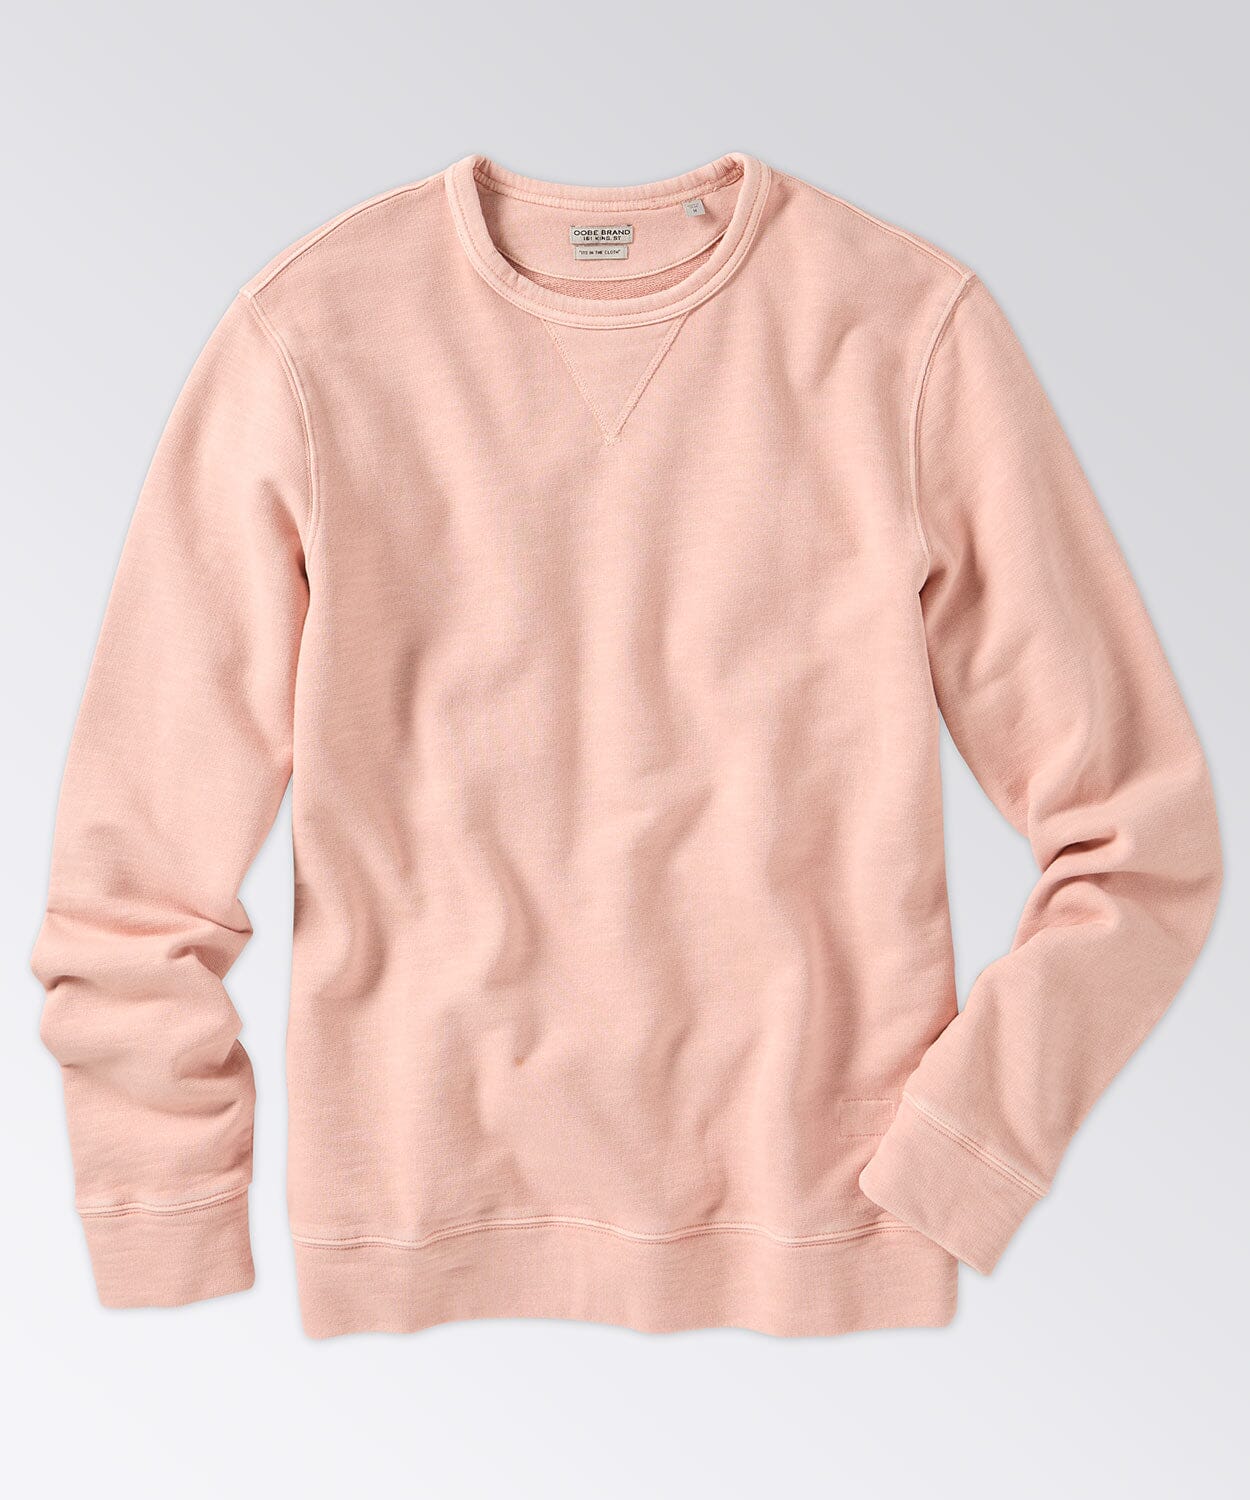 Hatteras Crew Pullover Knits OOBE BRAND 